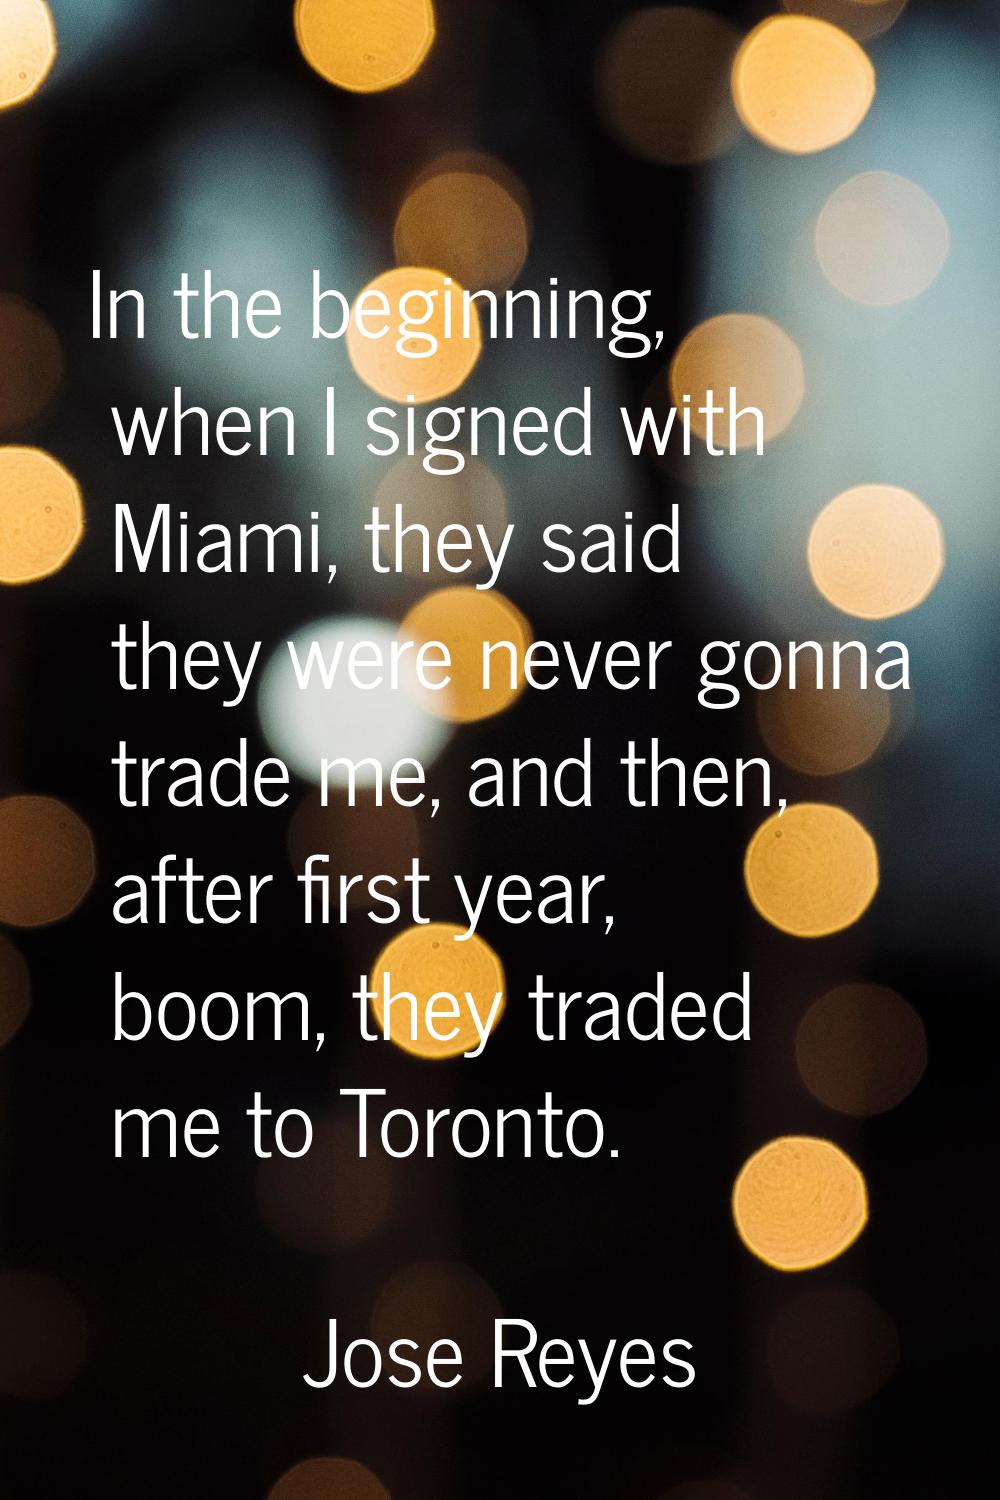 In the beginning, when I signed with Miami, they said they were never gonna trade me, and then, aft